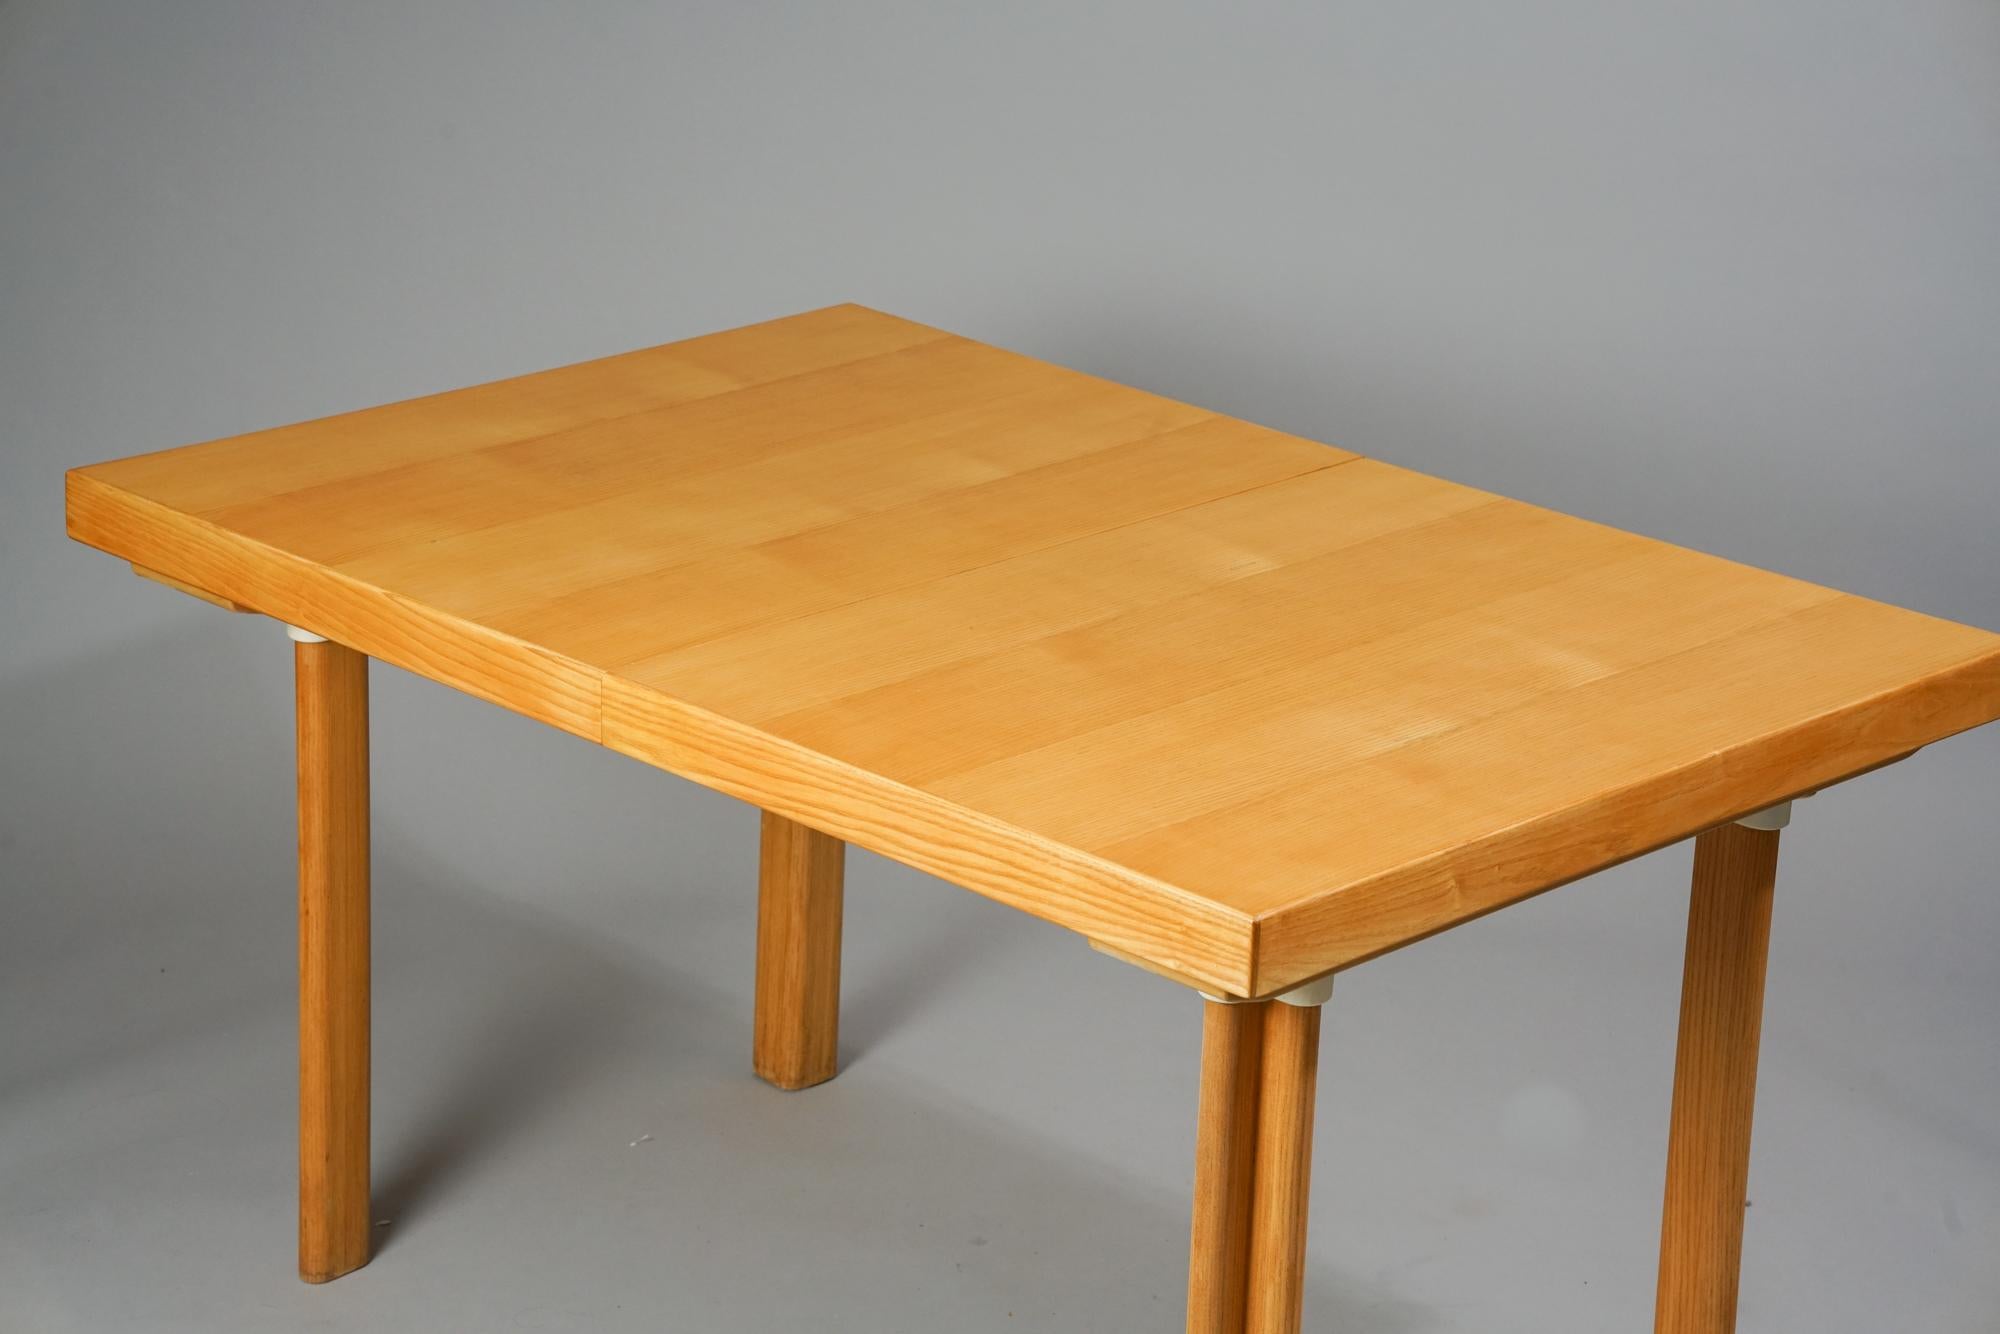 Alvar Aalto dining room table model H 92 for Artek, in the 1960s/1970s, ash tree, HL2 -legs, extendable model, the extendable part can be stored under the table top. Good vintage condition, restored by a craftman who is specialised in vintage